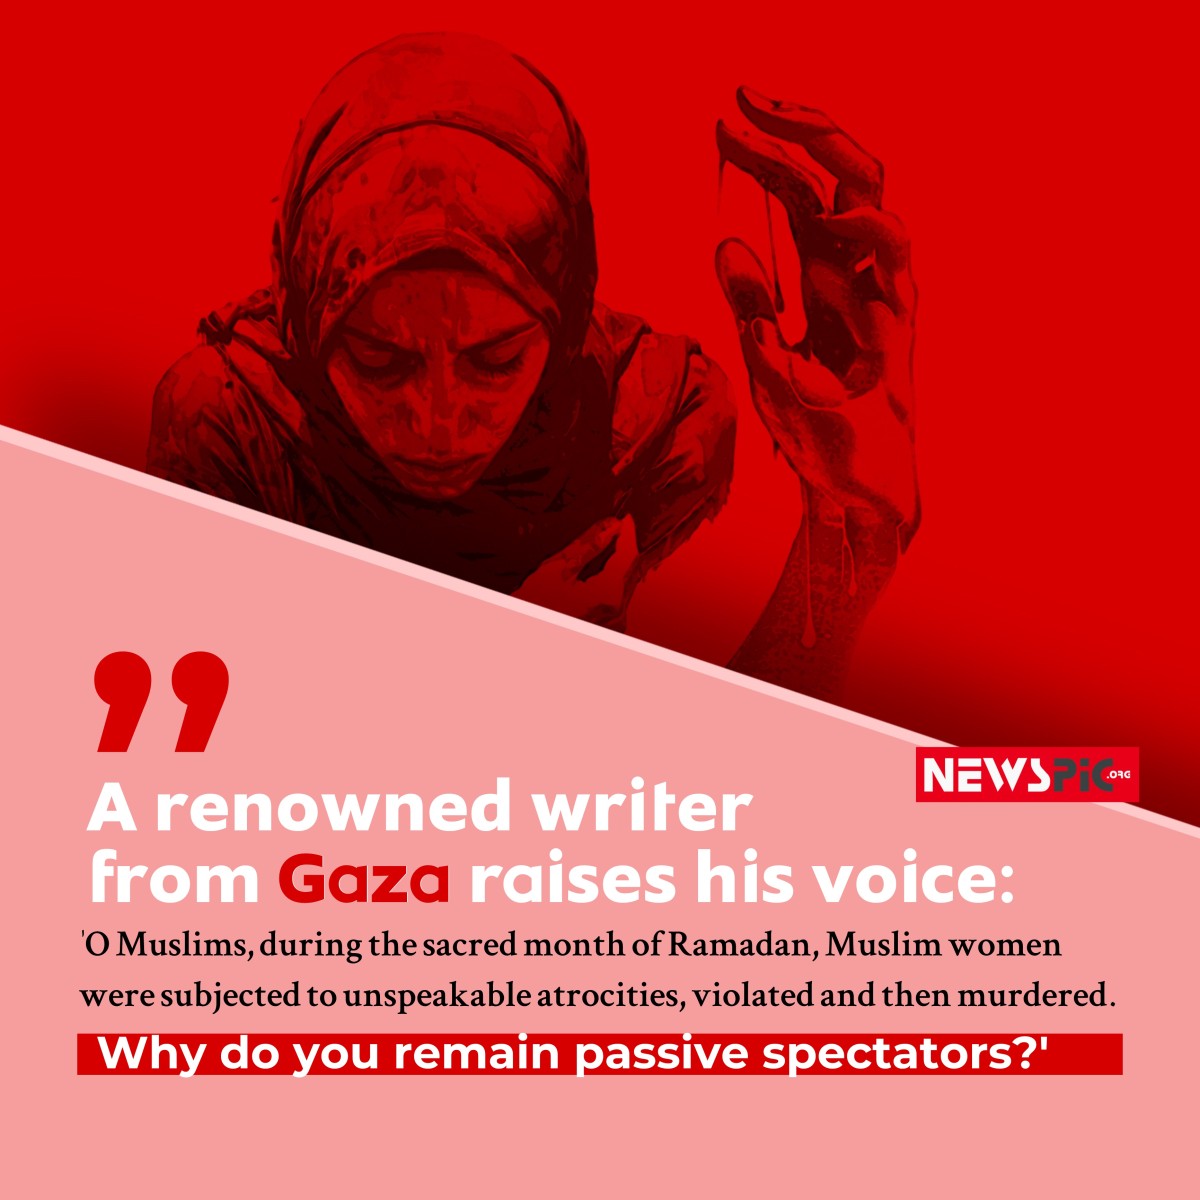 A renowned writer from Gaza raises his voice